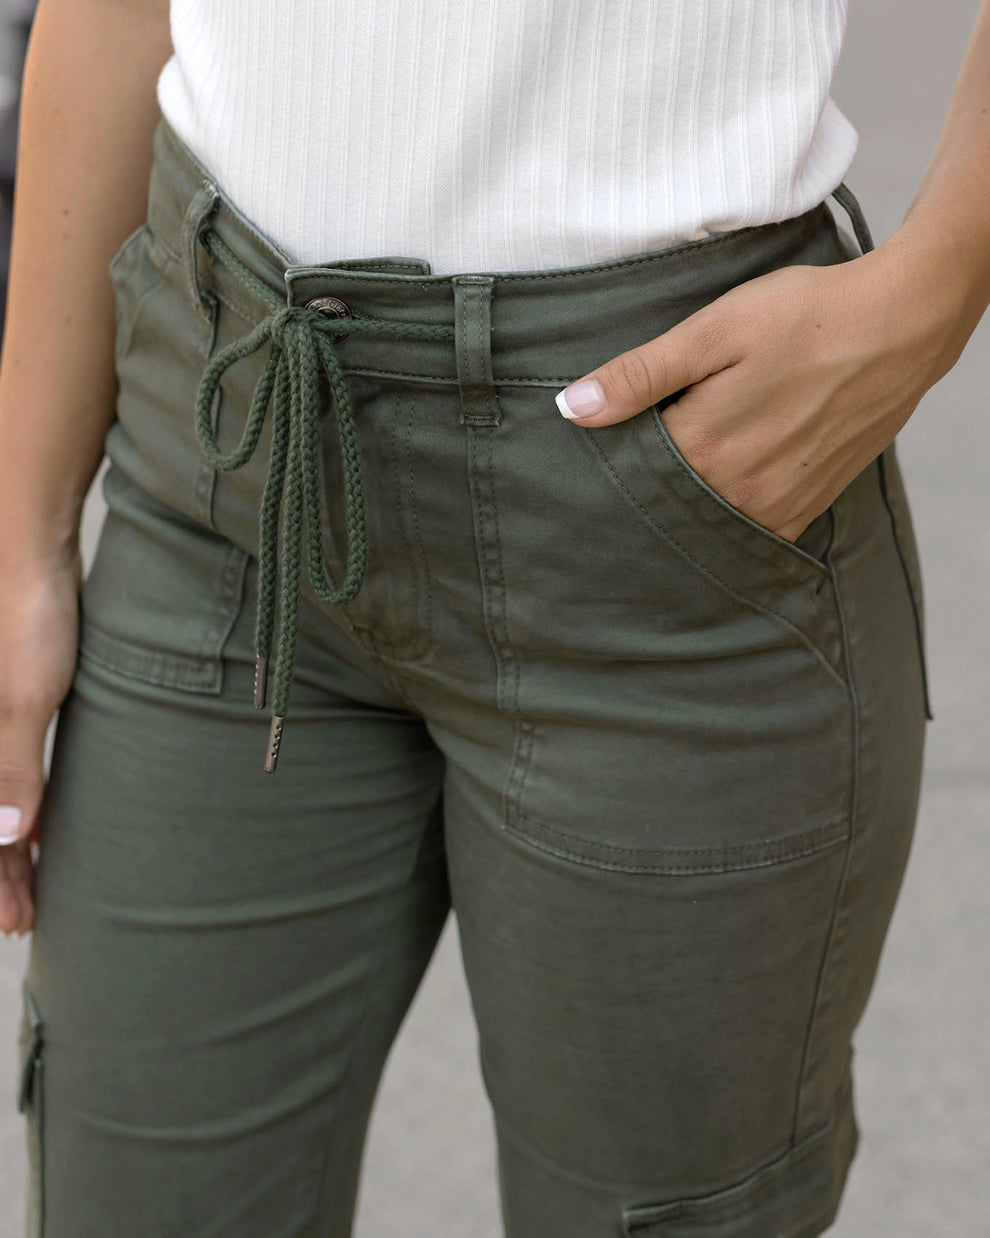 Grace & Lace Sueded Twill Cargo Pants - Deep Green